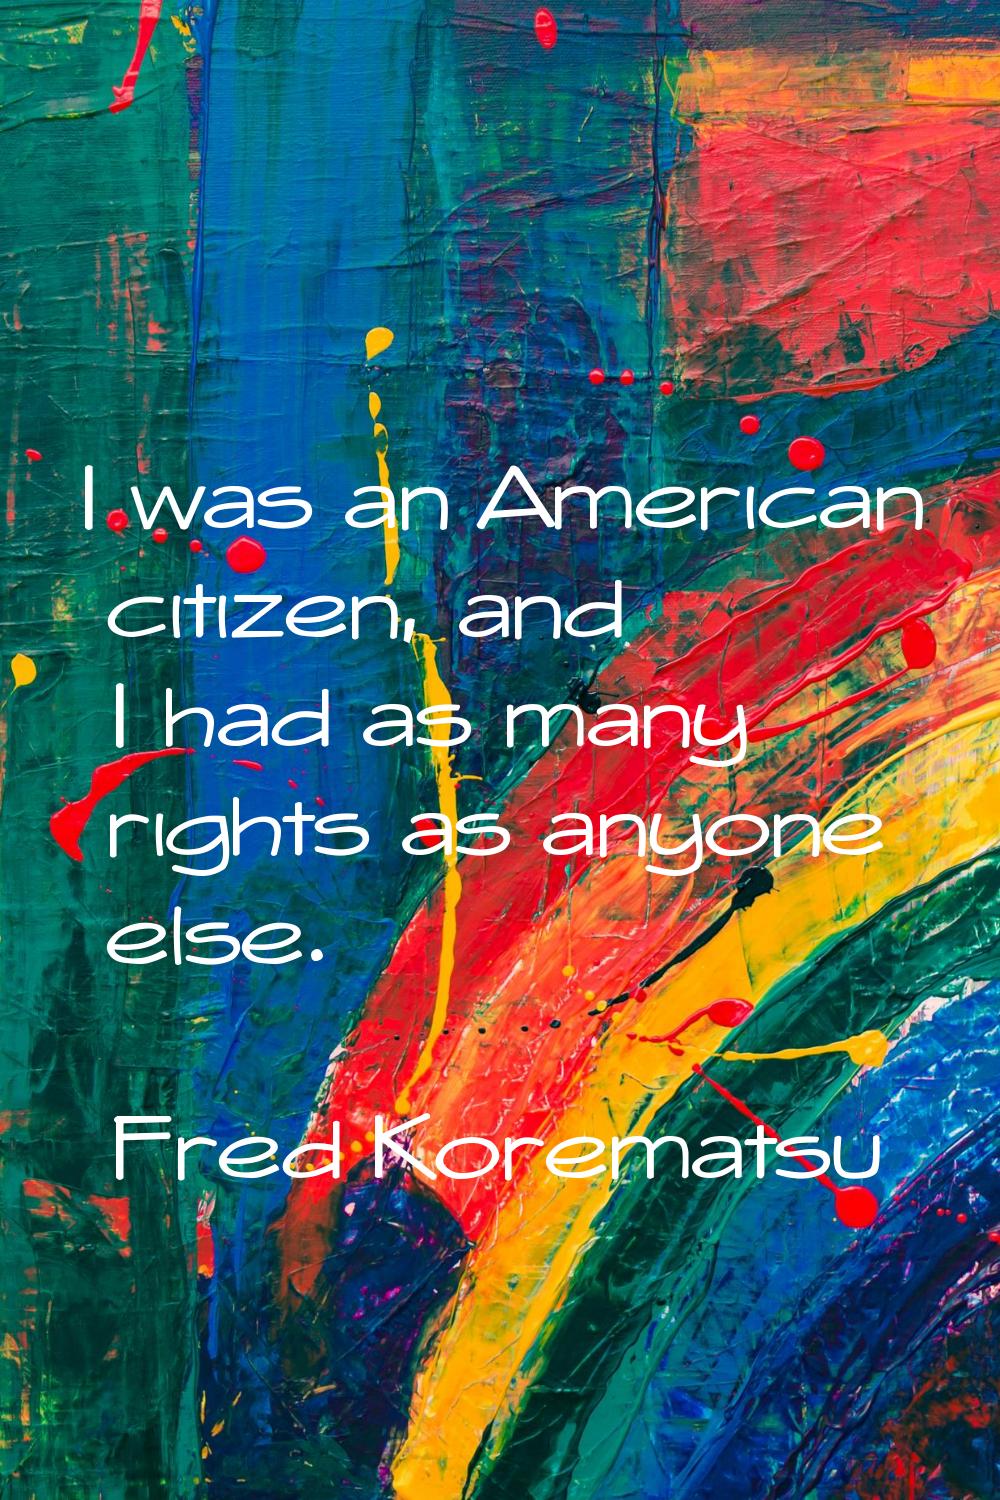 I was an American citizen, and I had as many rights as anyone else.